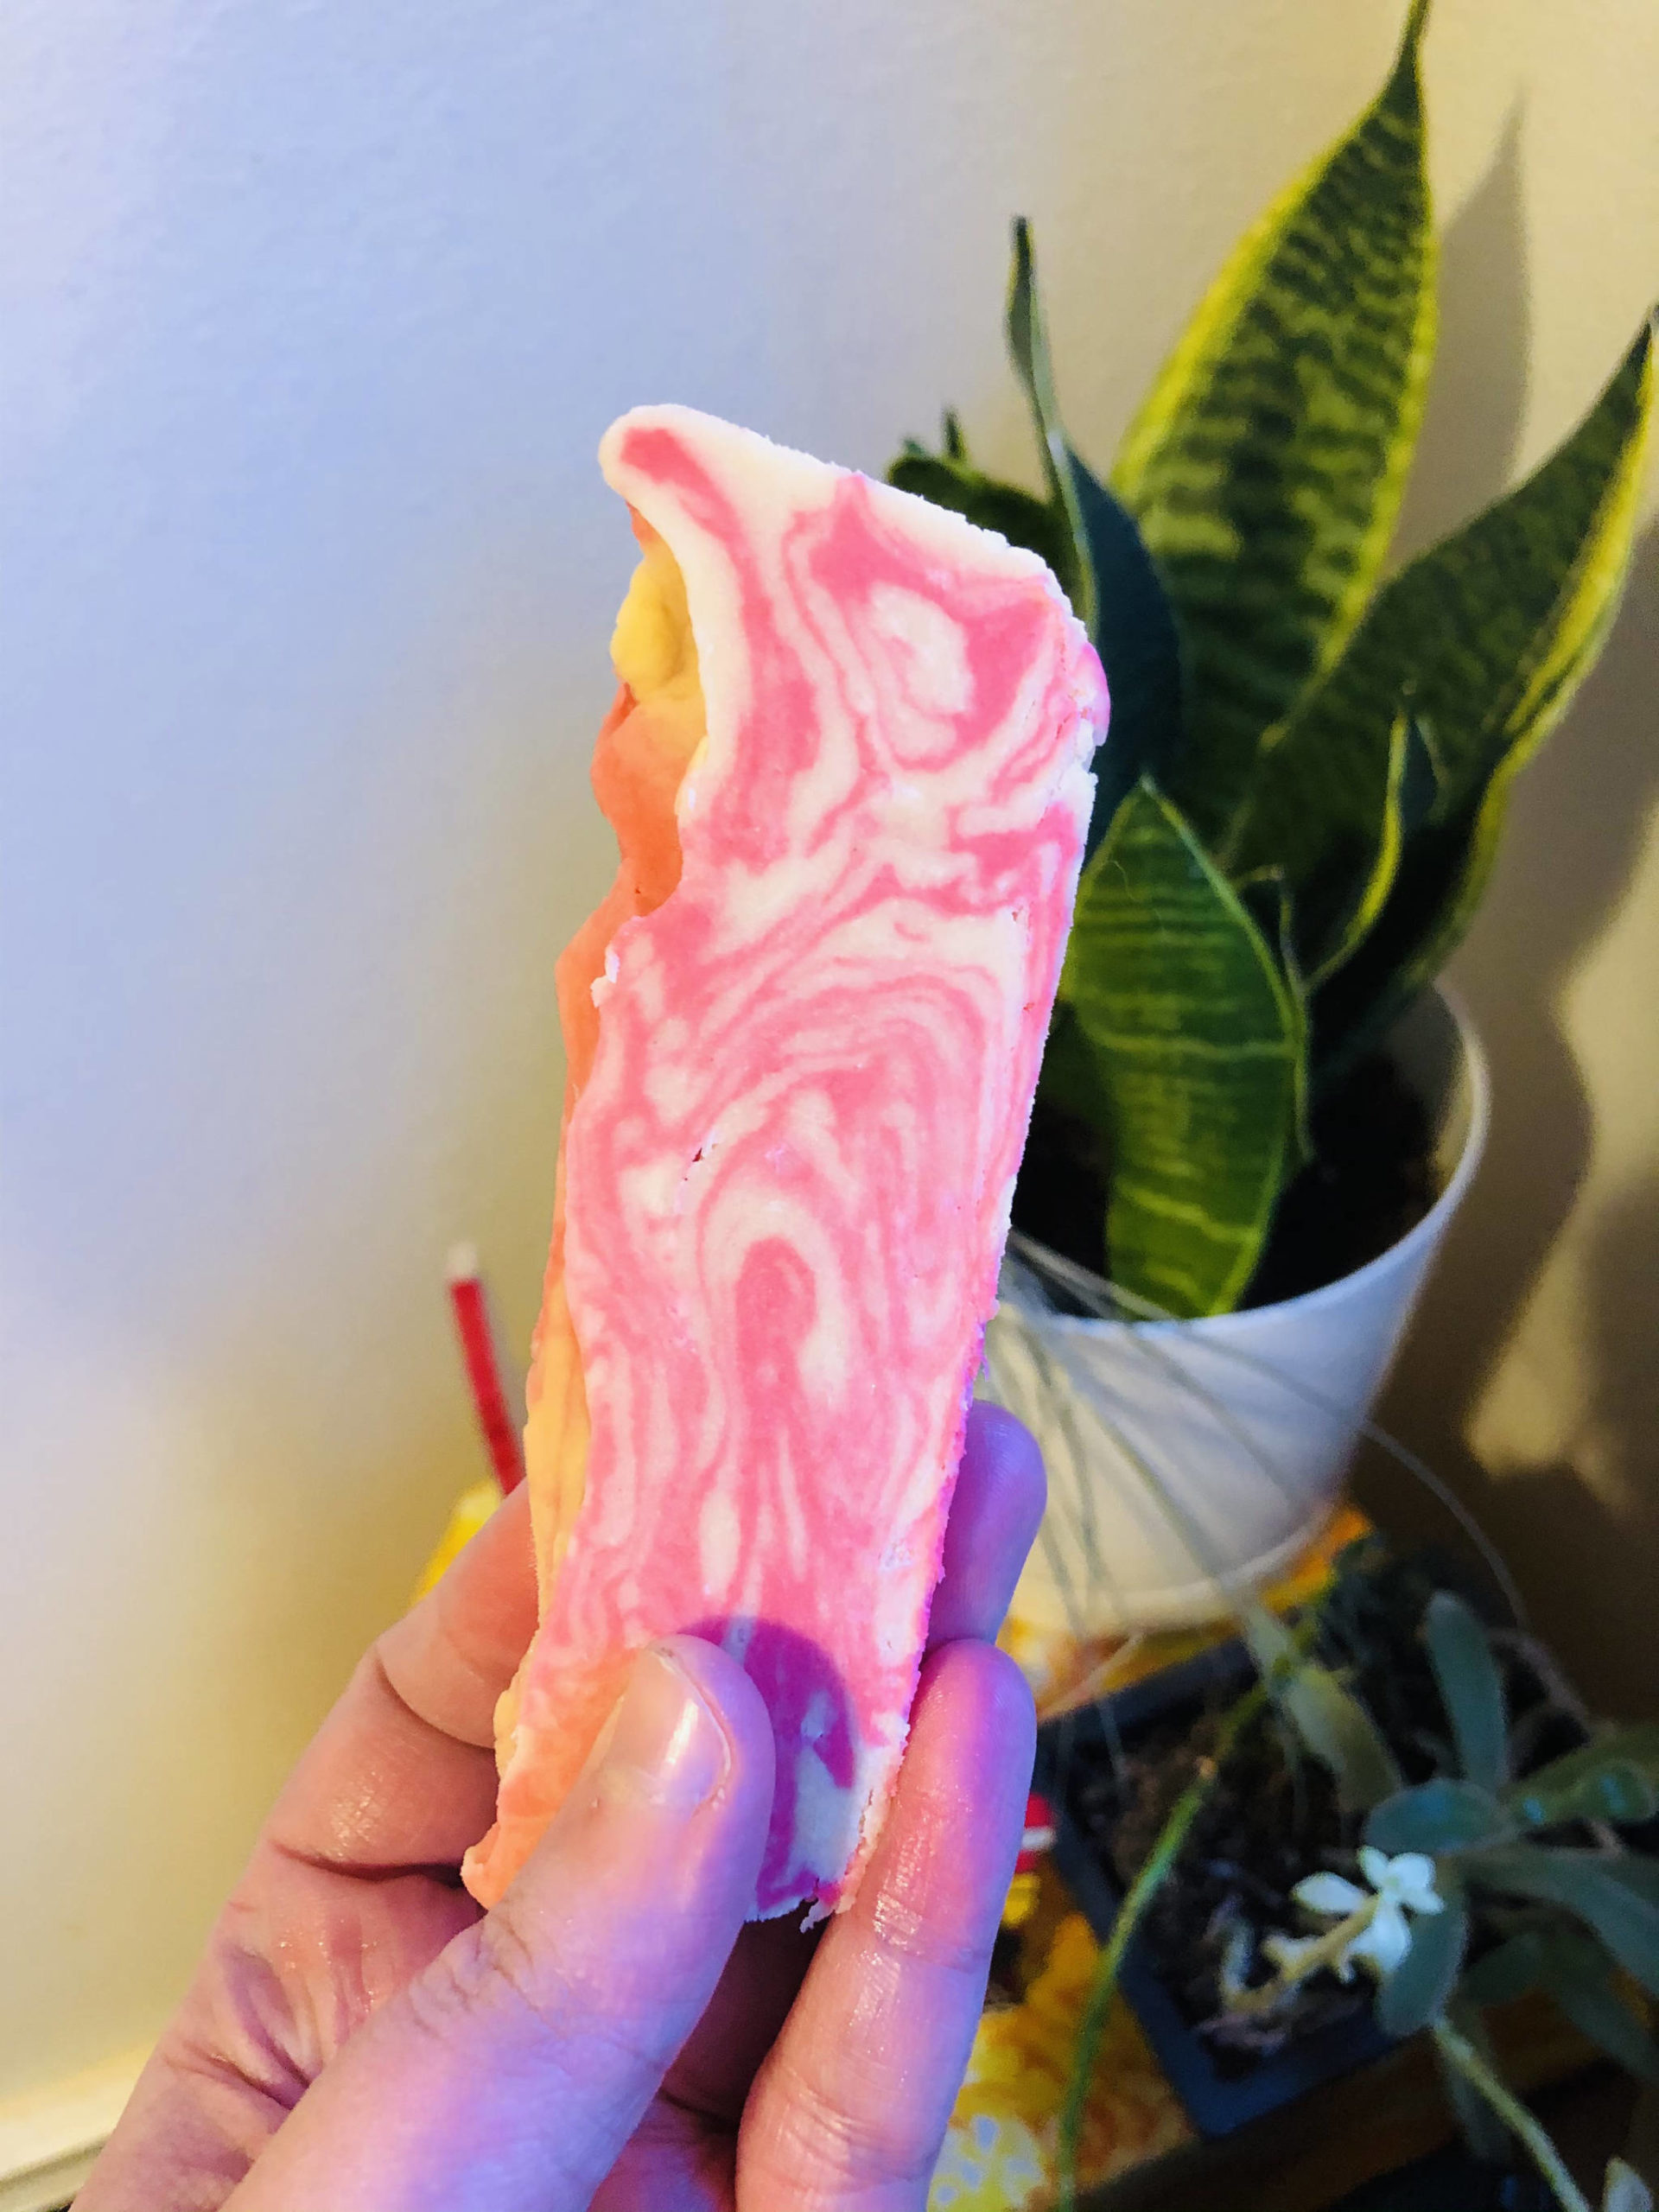 Raspberry syrup gives these cookies a pink marbling effect, on Dec. 15, 2020, in Anchorage, Alaska. (Photo by Victoria Petersen/Peninsula Clarion)